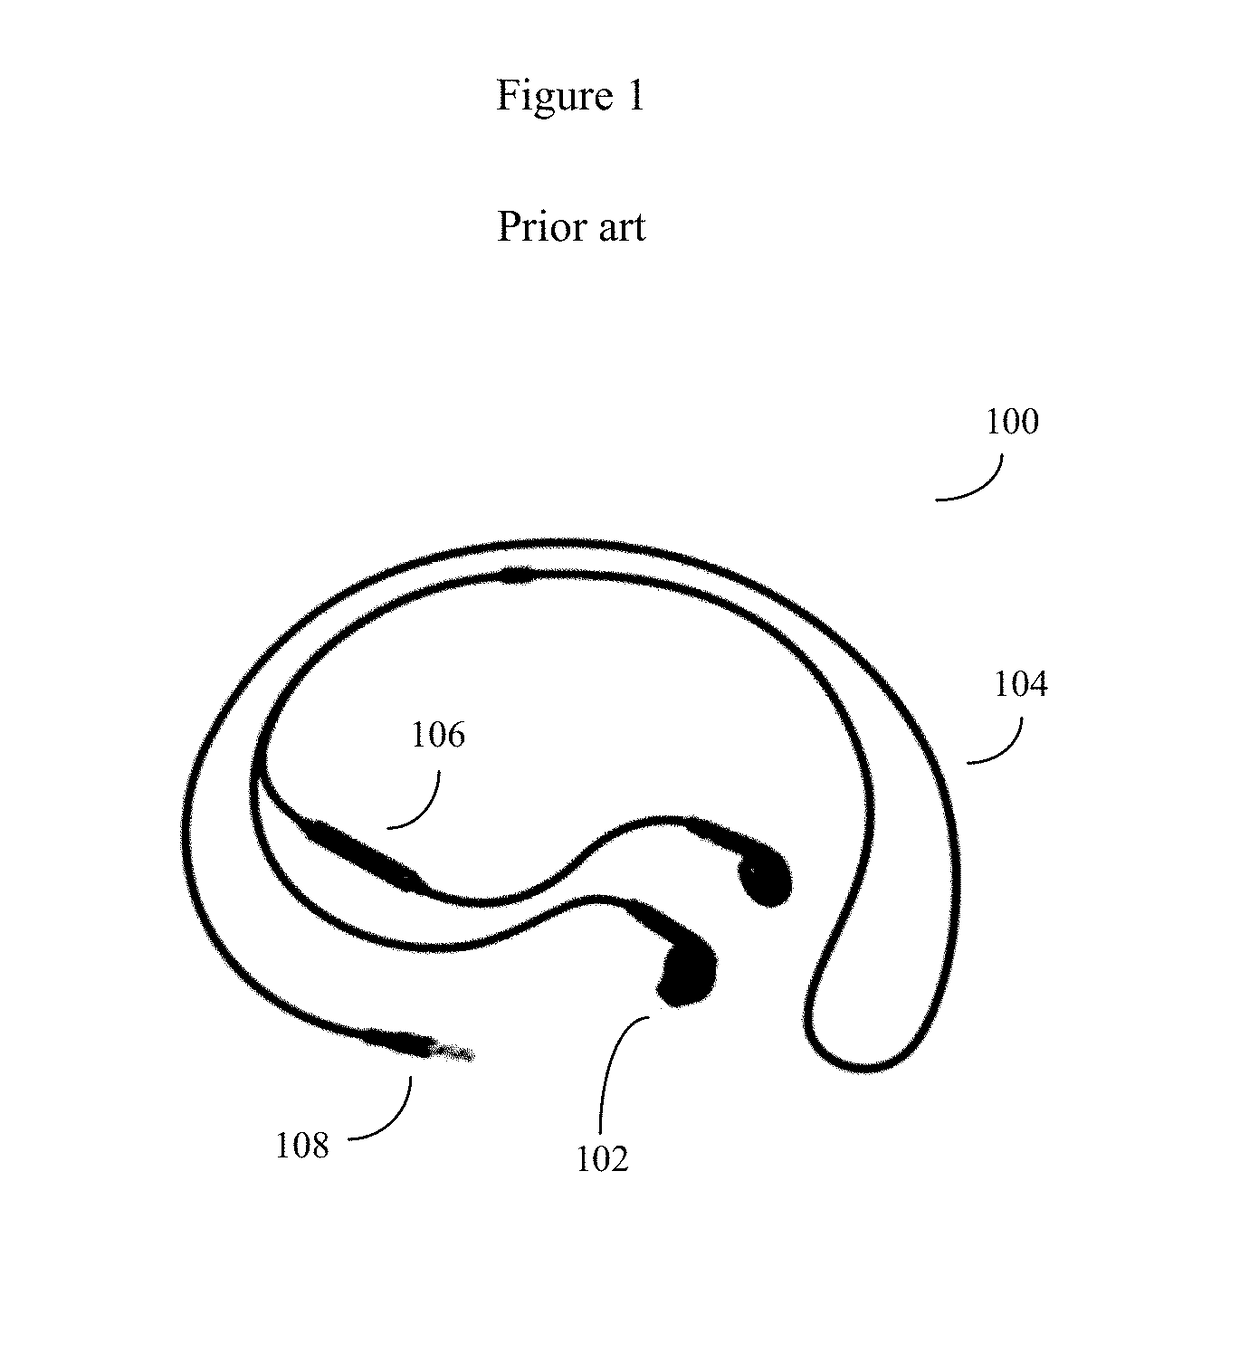 Wired wearable audio video to wireless audio video bridging device